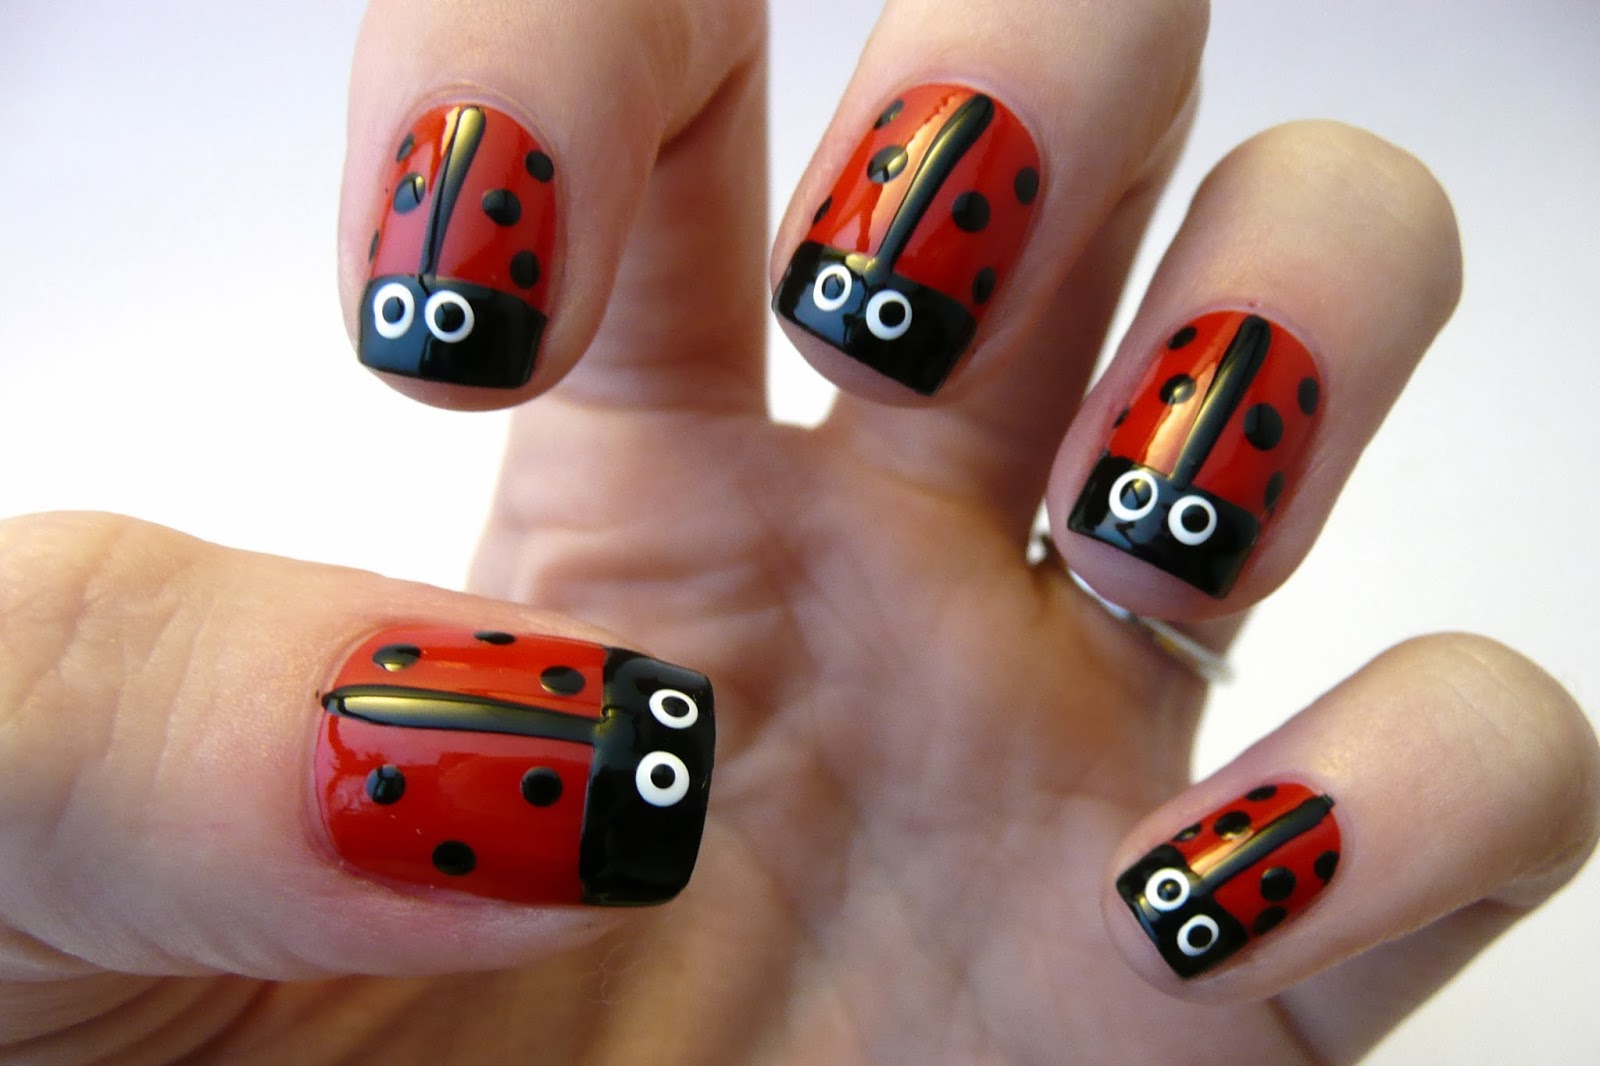 1. Ladybug Nail Art with Movable Wings Tutorial - wide 4